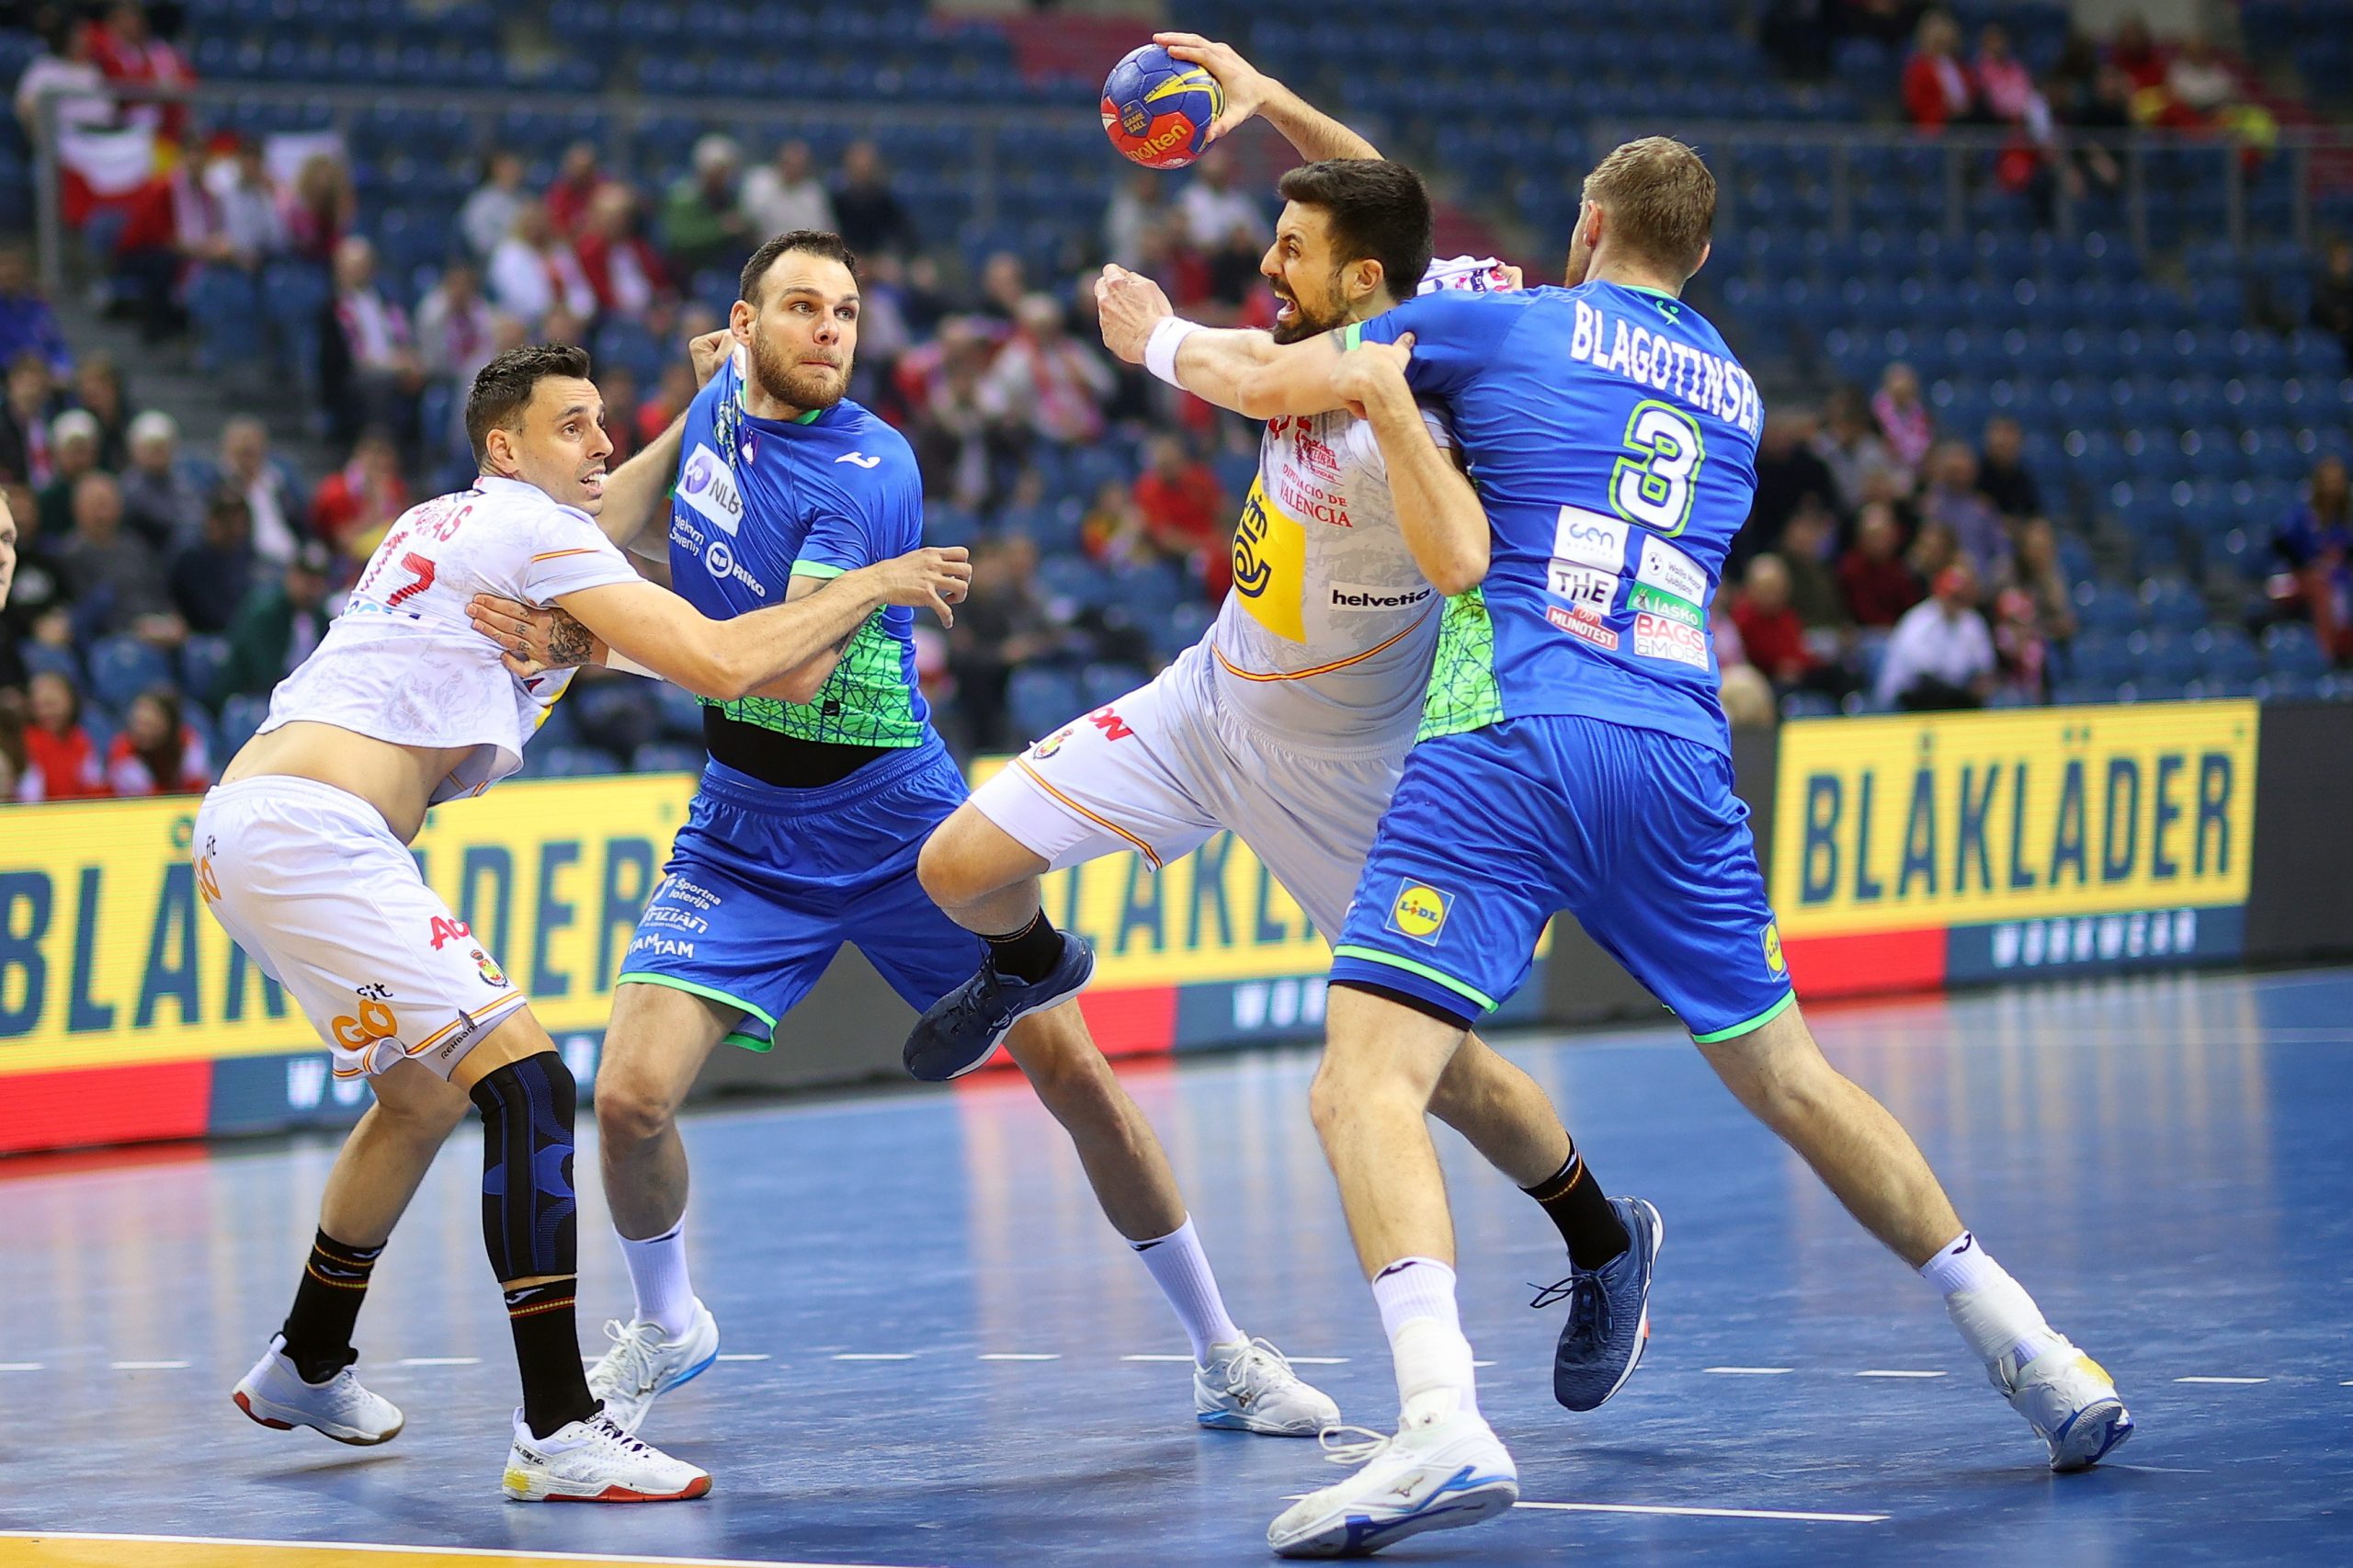 epa10418241 Borut Mackovsek (2L) and Blaz Blagotinsek (R) of Slovenia and Adrian Figueras Trejo (L) and Agustin Casando Marcelo (2R) of Spain in action during the 2023 IHF Men's Handball World Championship group I match between Slovenia and Spain in Katowice, Poland, 20 January 2023.  EPA/Lukasz Gagulski POLAND OUT